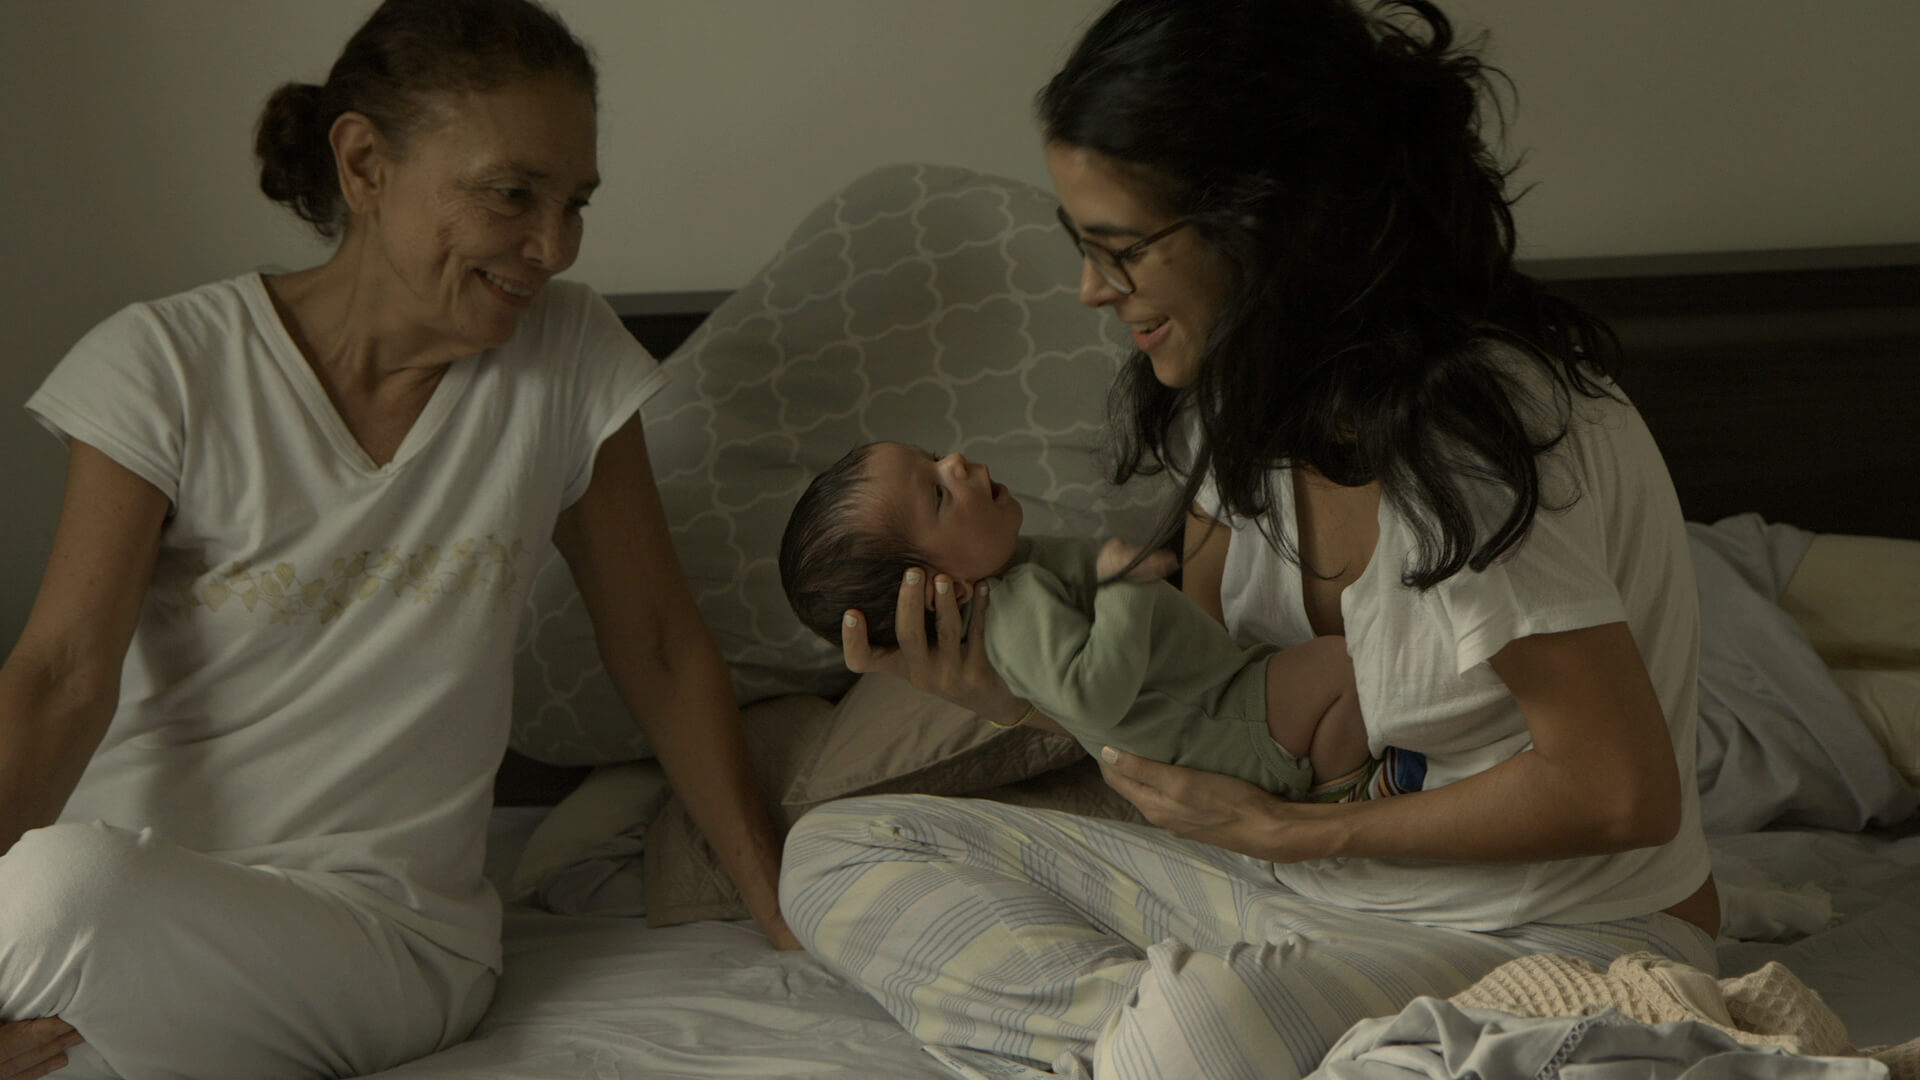 Two women in a bed, one holds a newborn baby and the other watches them